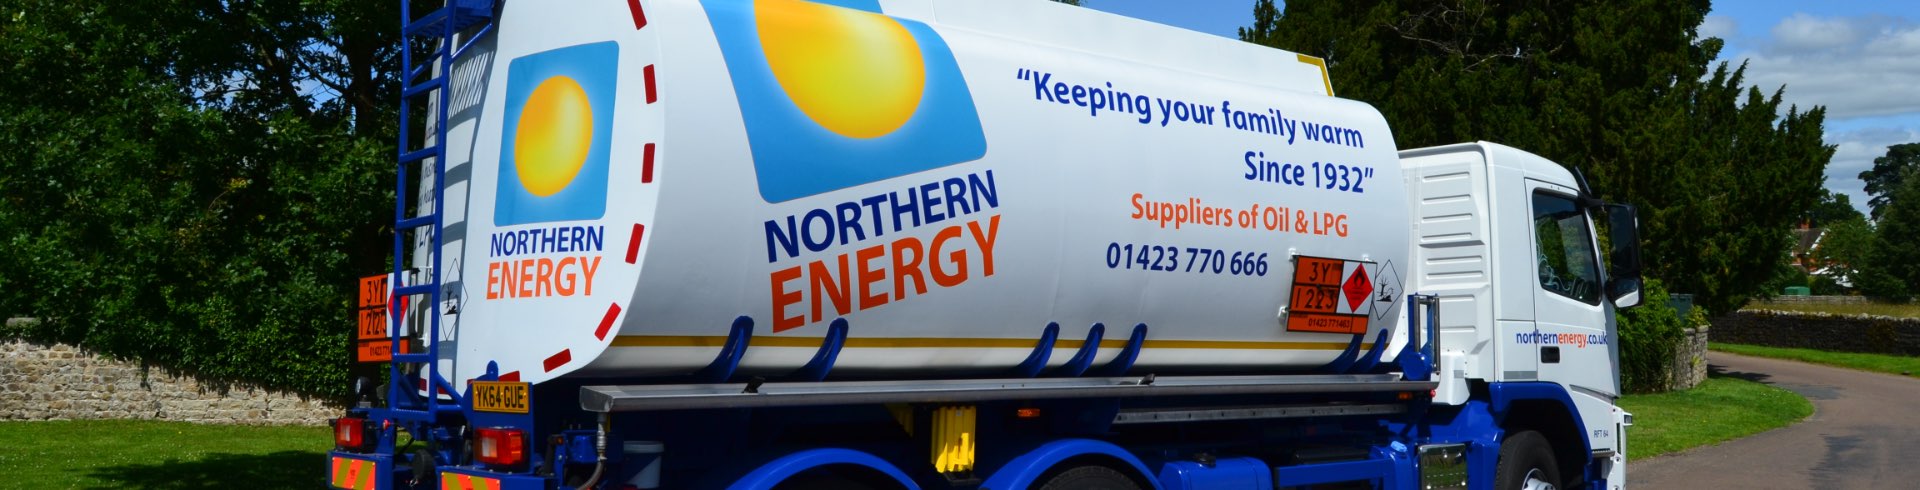 northern energy truck on a road